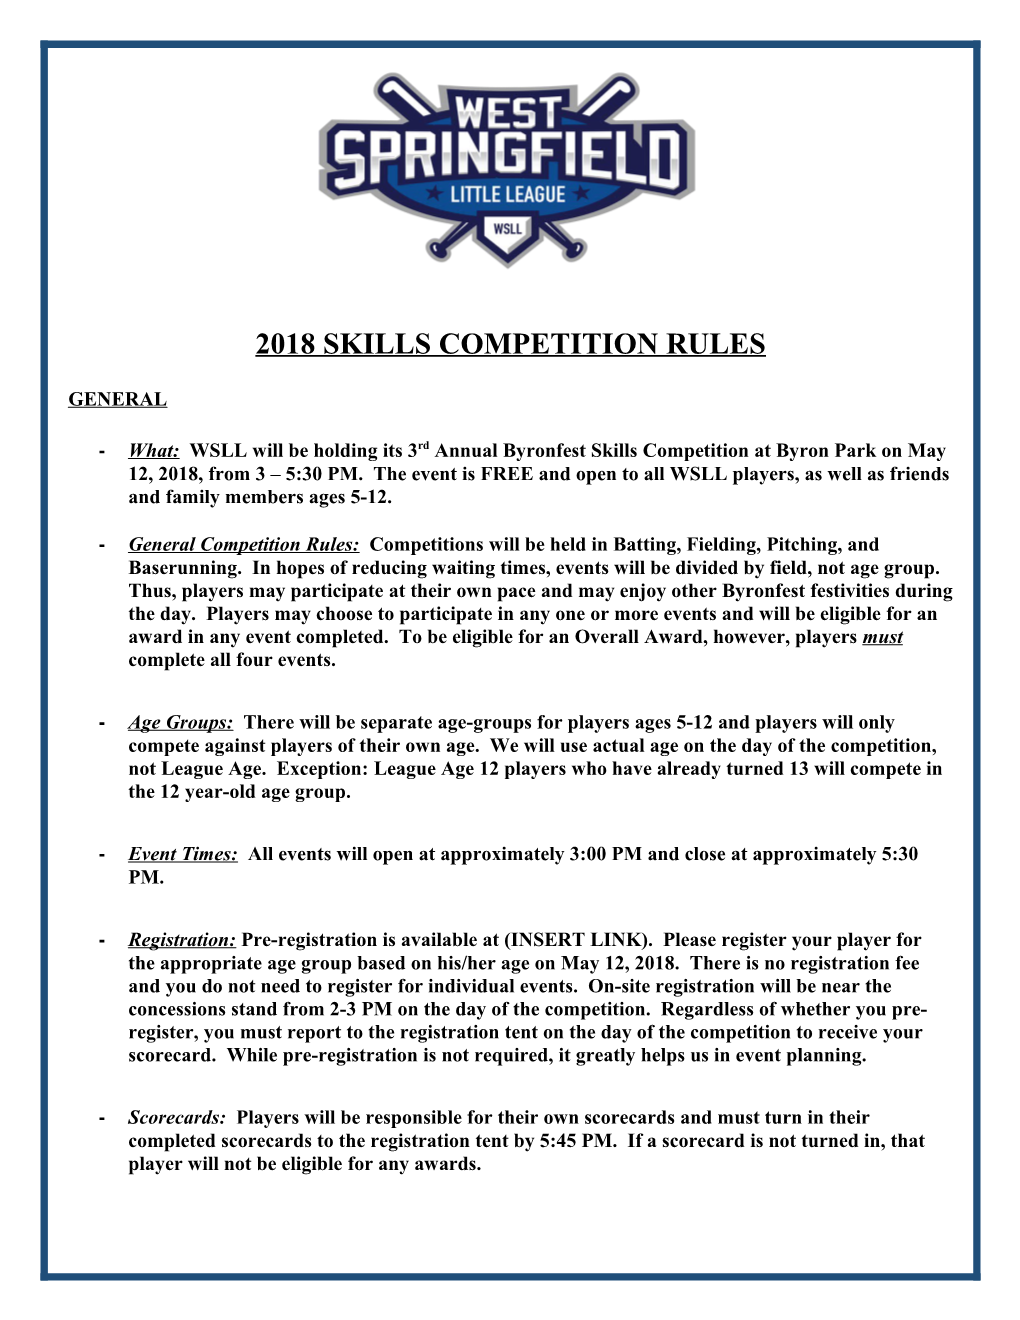 2018 Skills Competition Rules